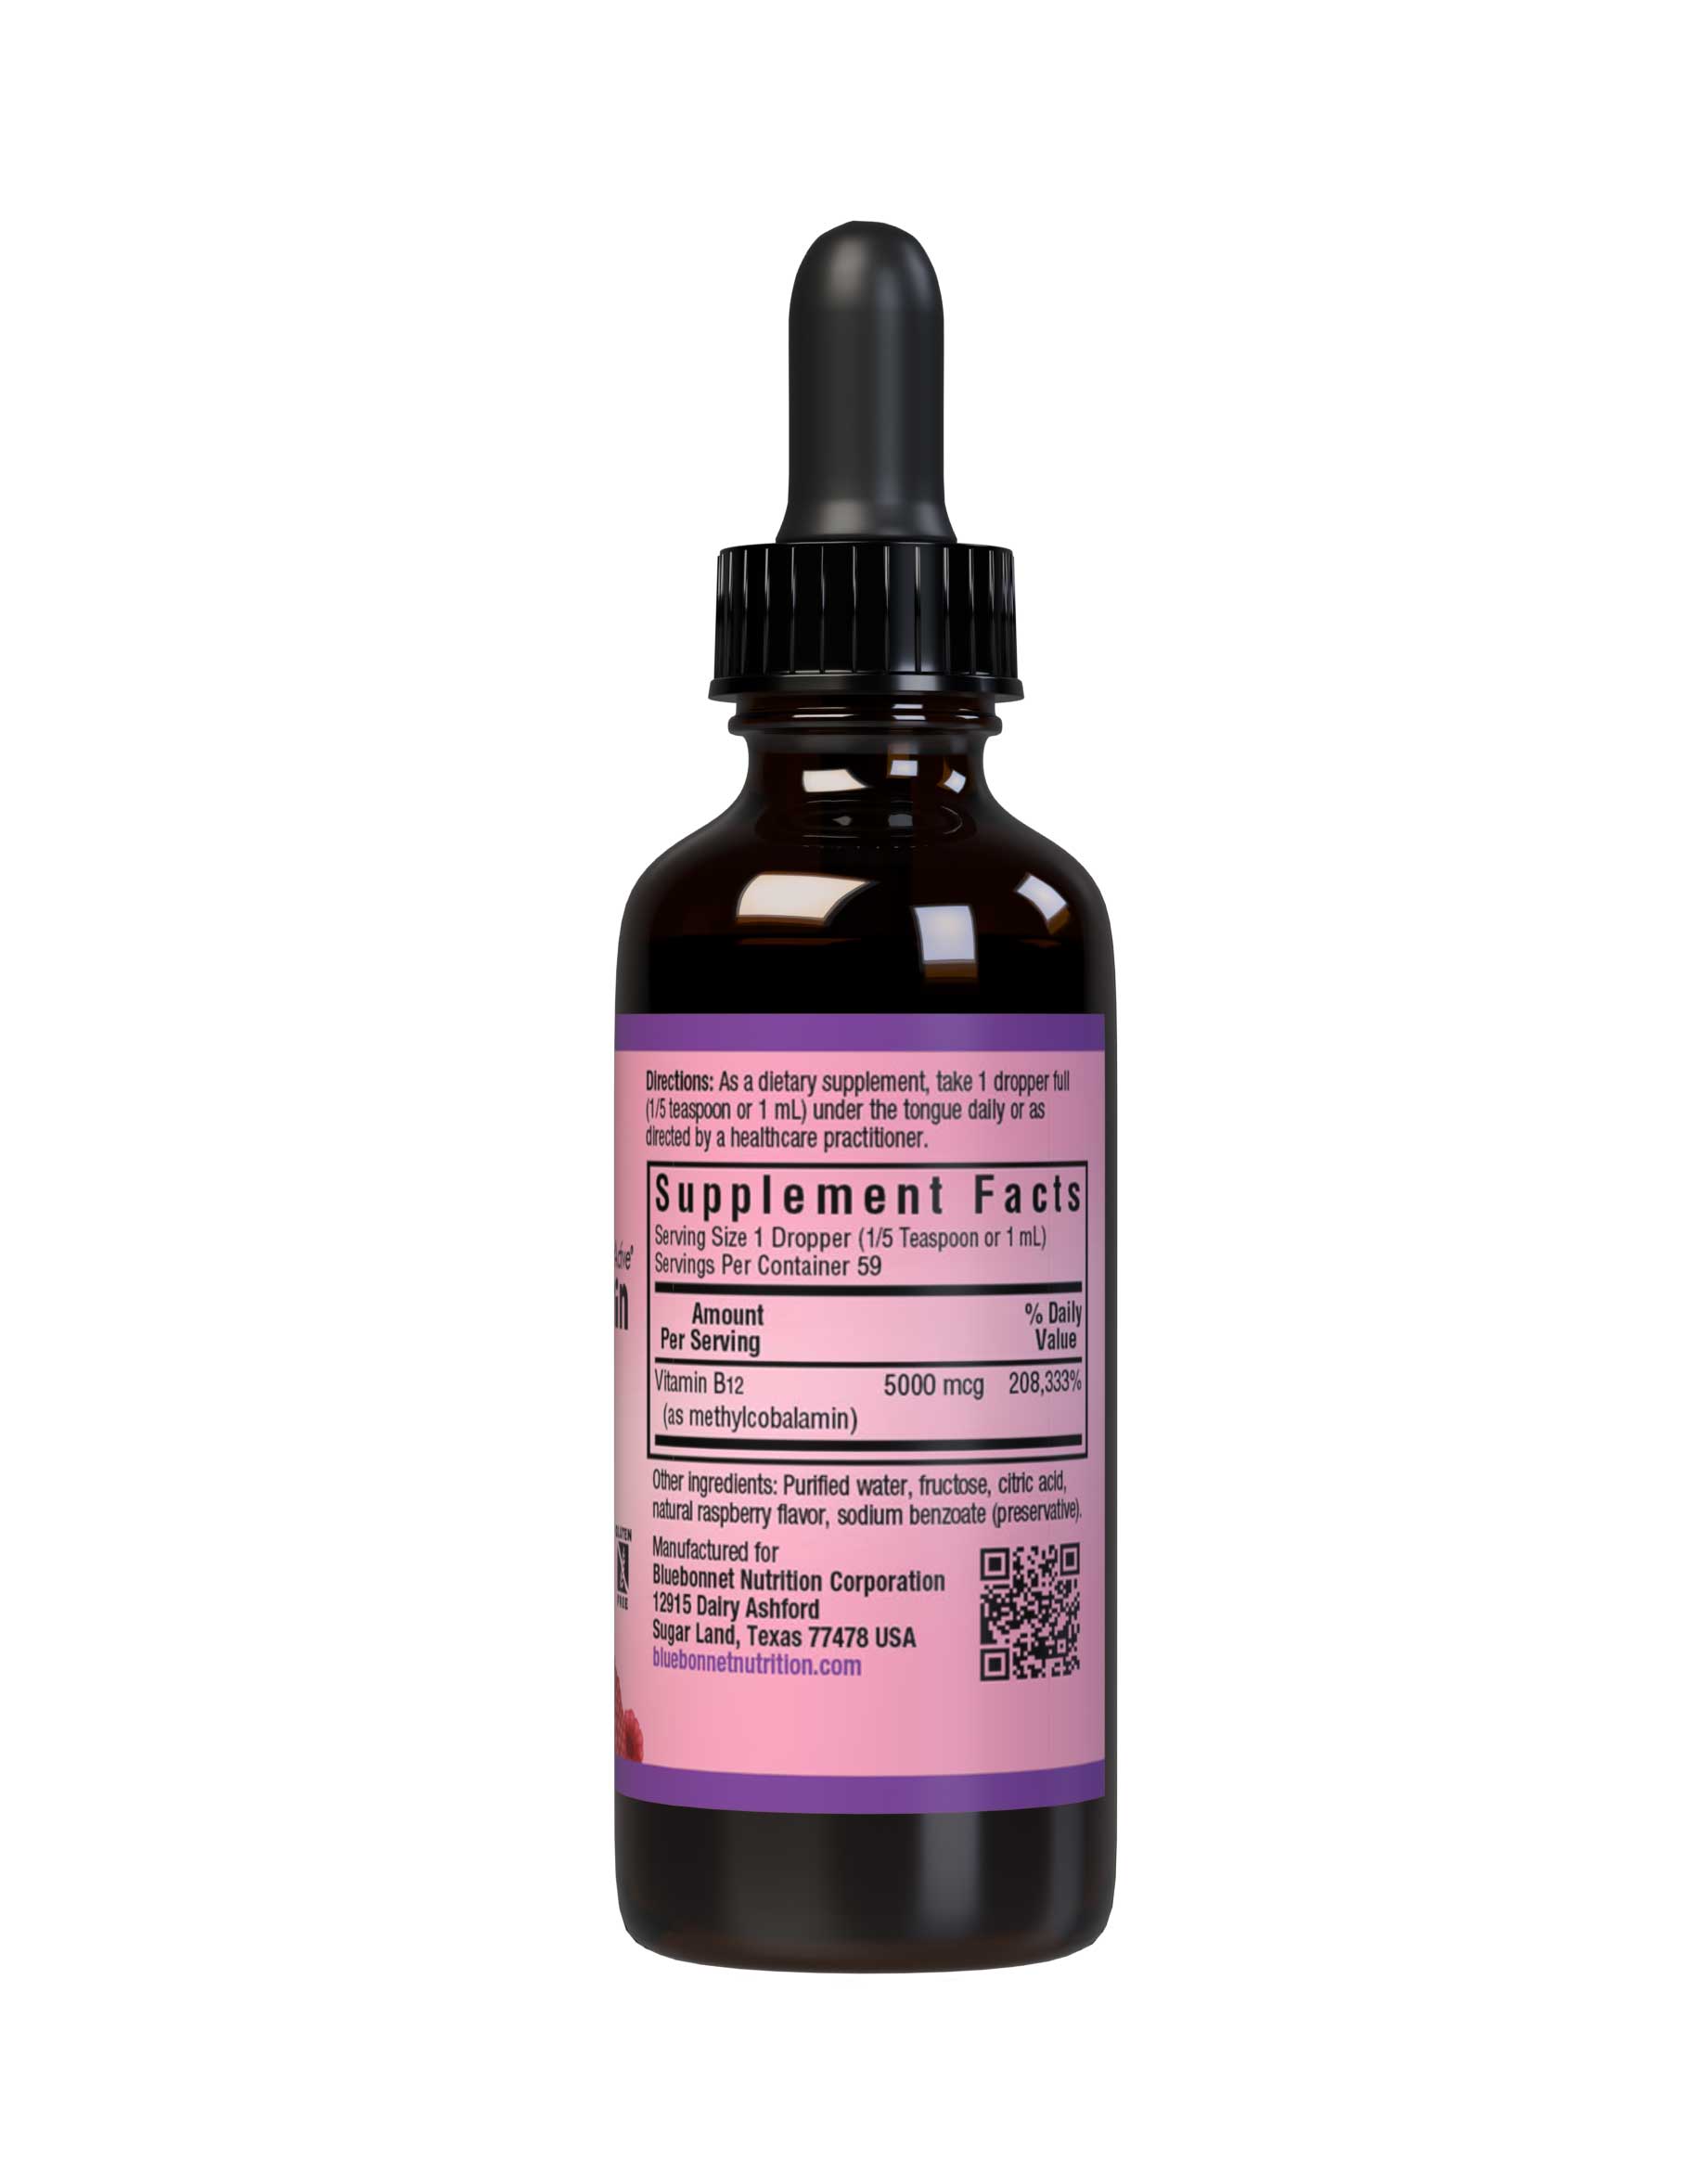 Bluebonnet’s Liquid CellularActive Methylcobalamin Vitamin B12 5000 mcg is formulated with fast-acting vitamin B12 as methylcobalamin, a coenzyme form of B12, which may be better utilized and better retained in the body. Vitamin B12 supports cellular energy production and nervous system health. Supplement facts panel. #size_2 fl oz